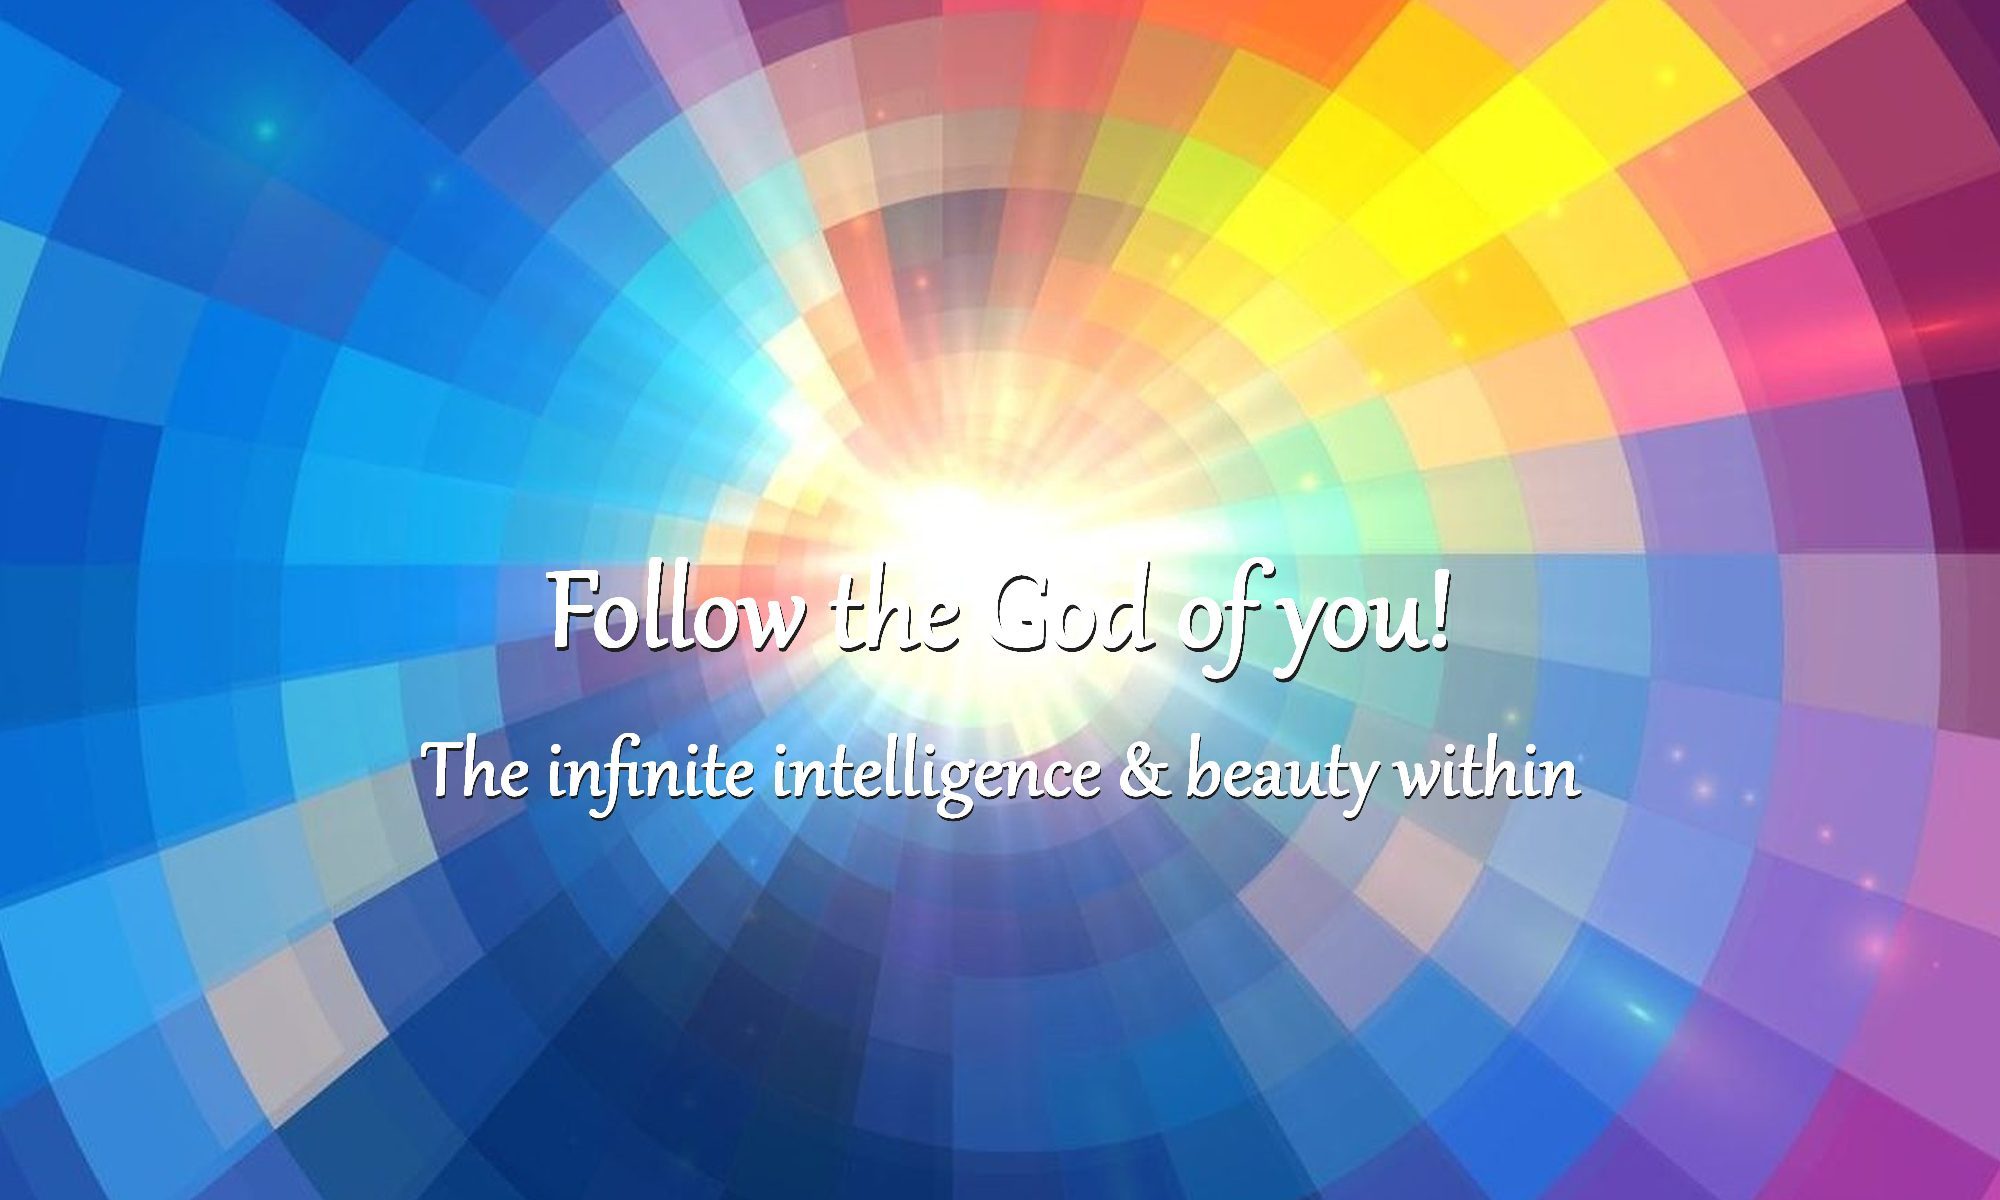 How do I know what to do or who to follow? What is the God of You?